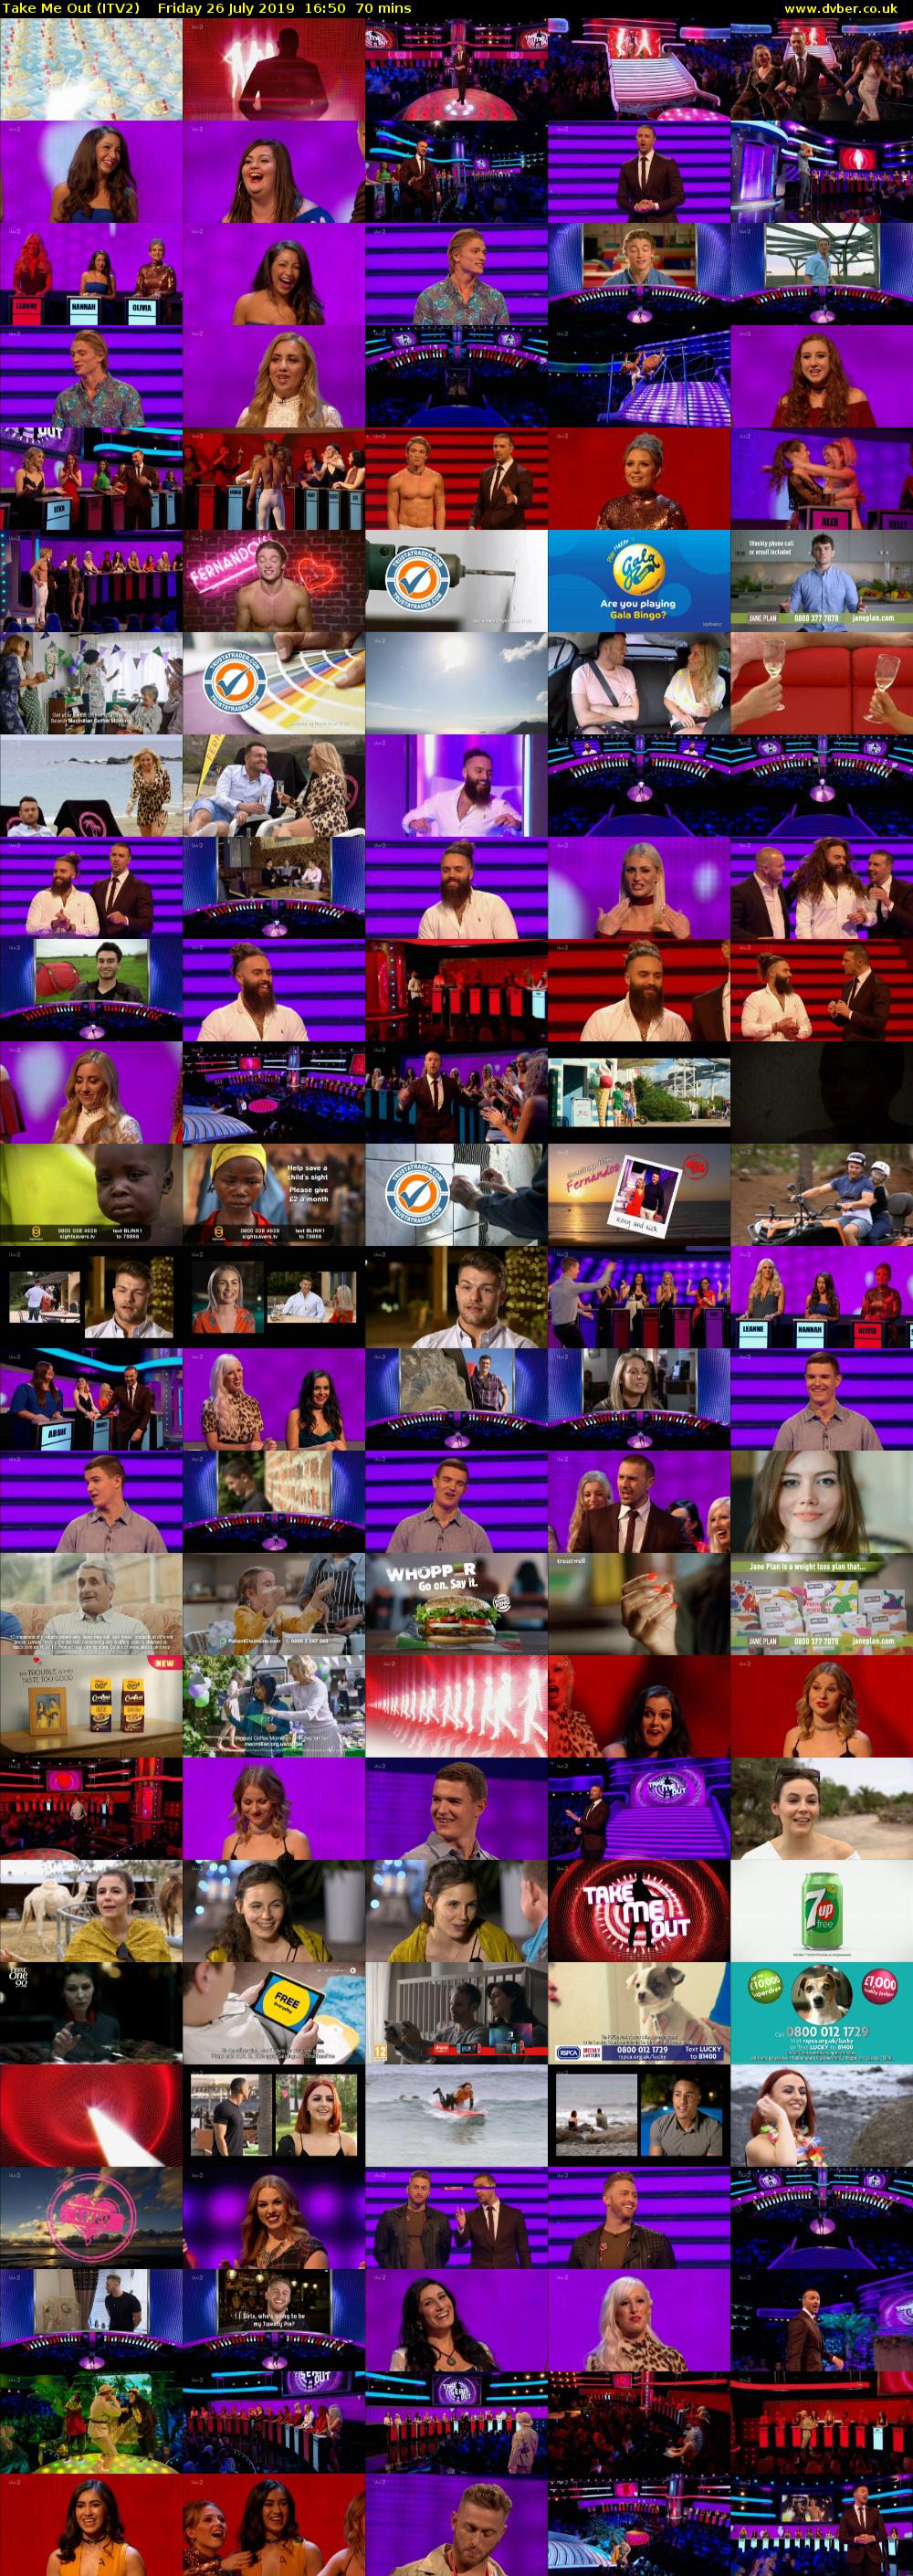 Take Me Out (ITV2) Friday 26 July 2019 16:50 - 18:00